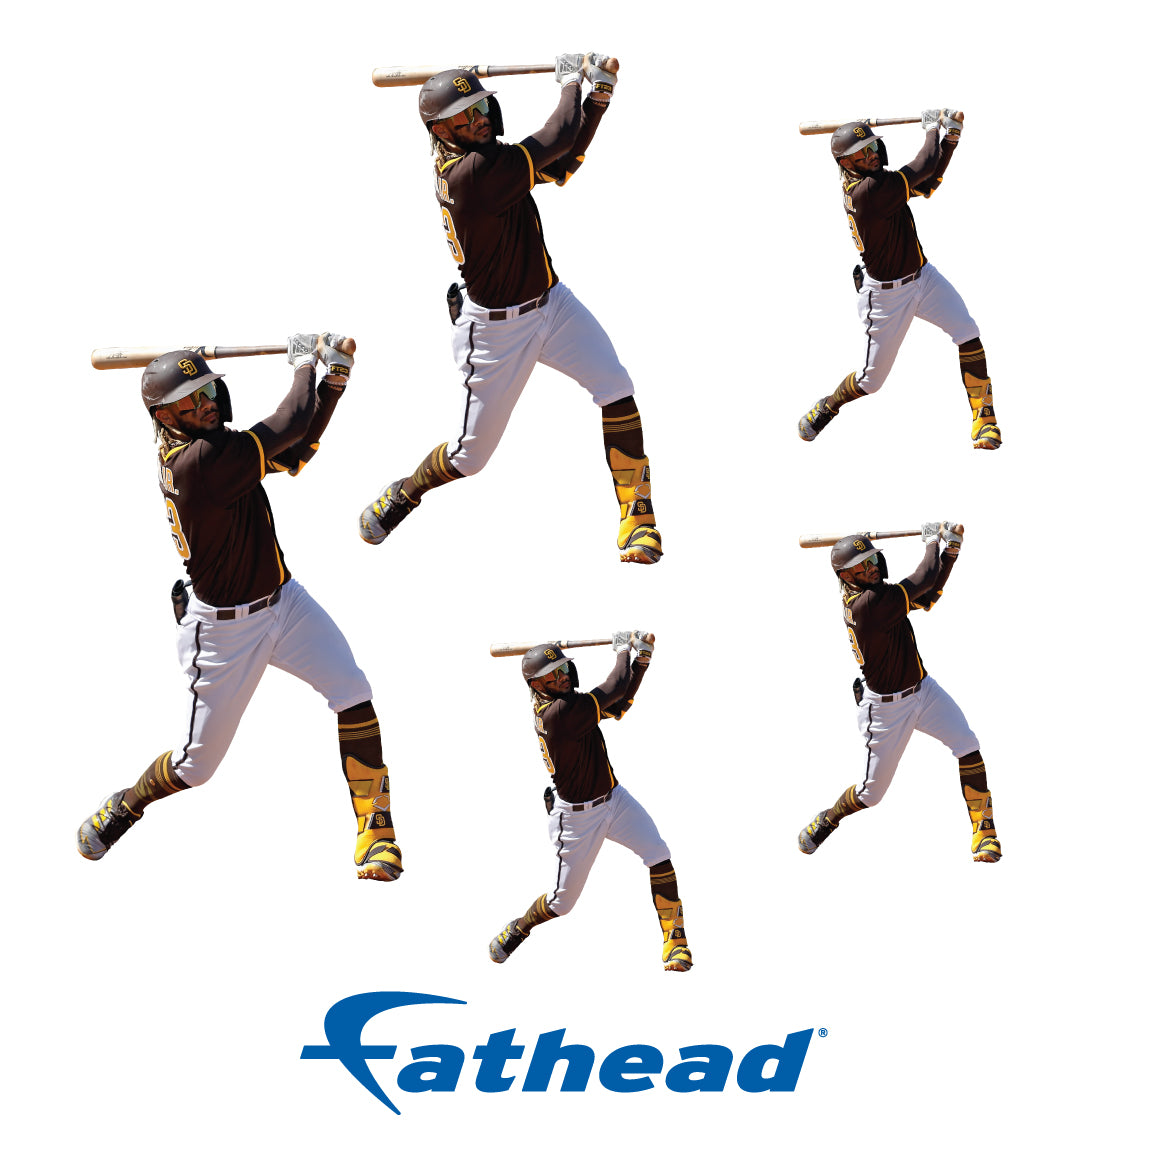 Sheet of 5 -San Diego Padres: Fernando Tat√≠s Jr. Player Minis - Officially Licensed MLB Removable Adhesive Decal